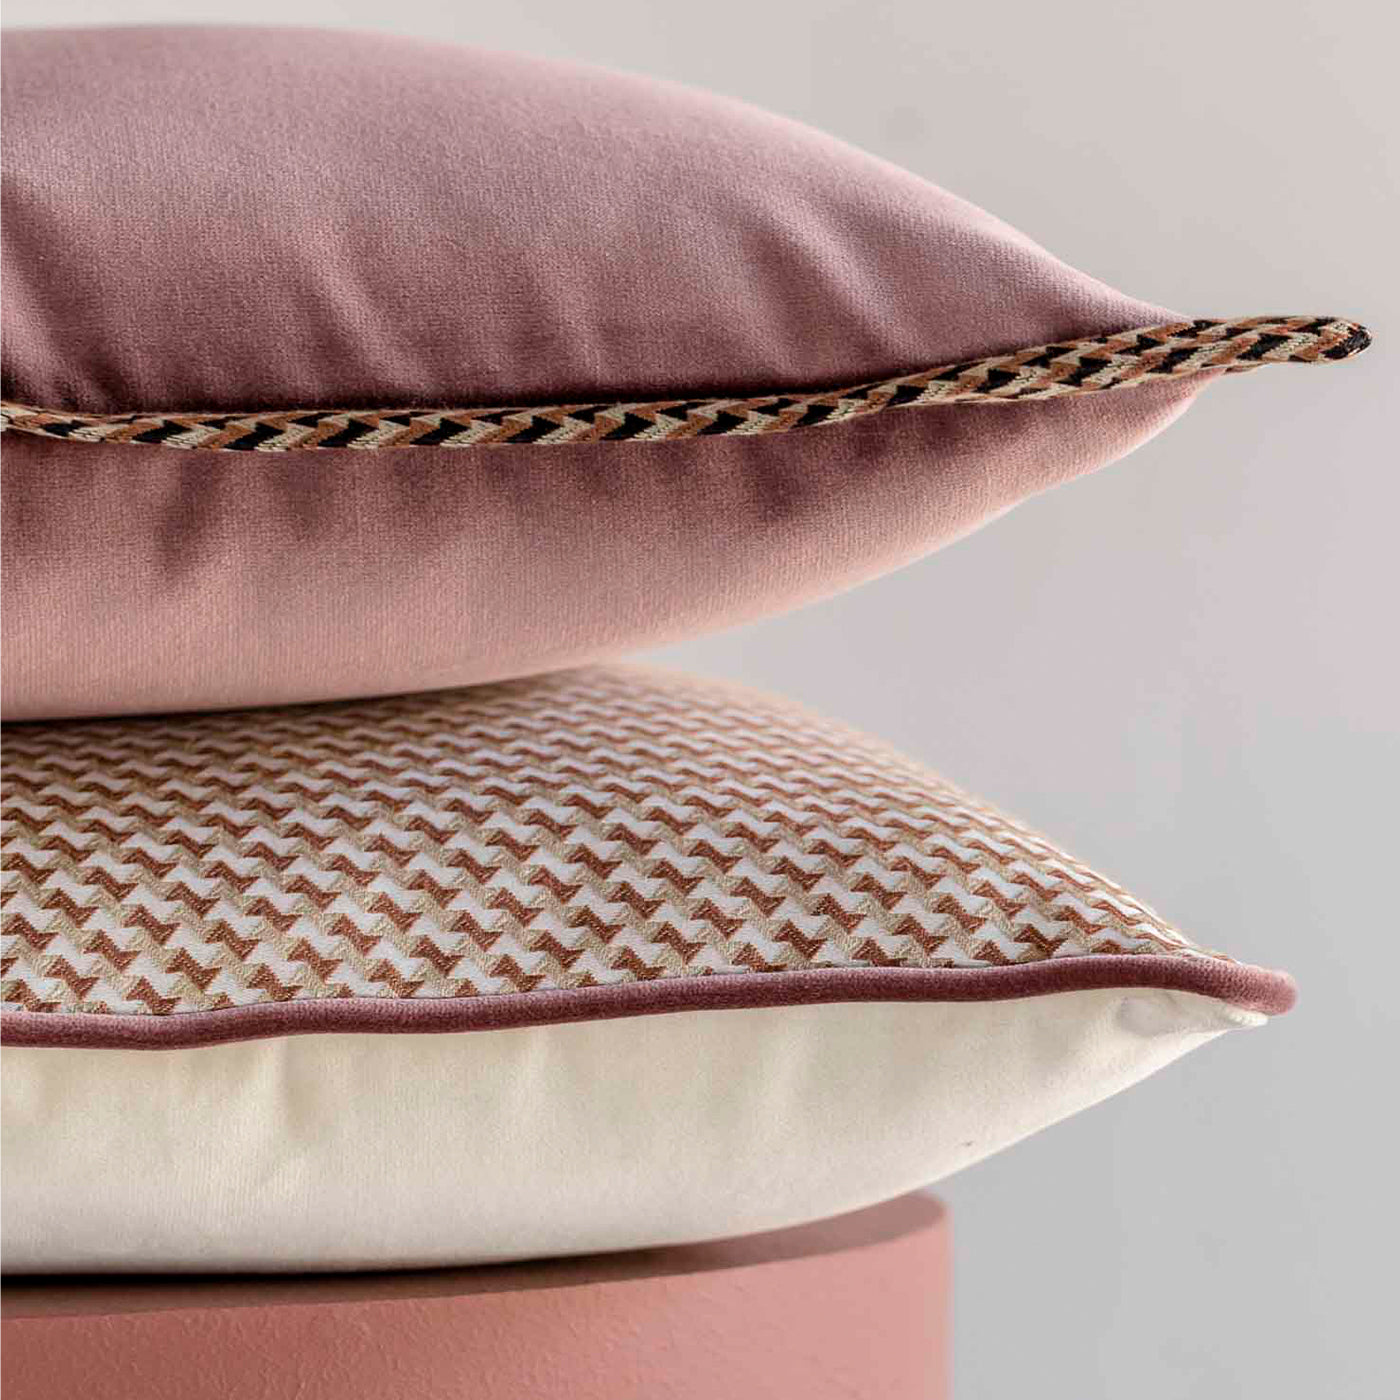 Most Carrè Flat Cushion in cotton velvet and Micro-Patterned jacquard fabric - Alternative view 2